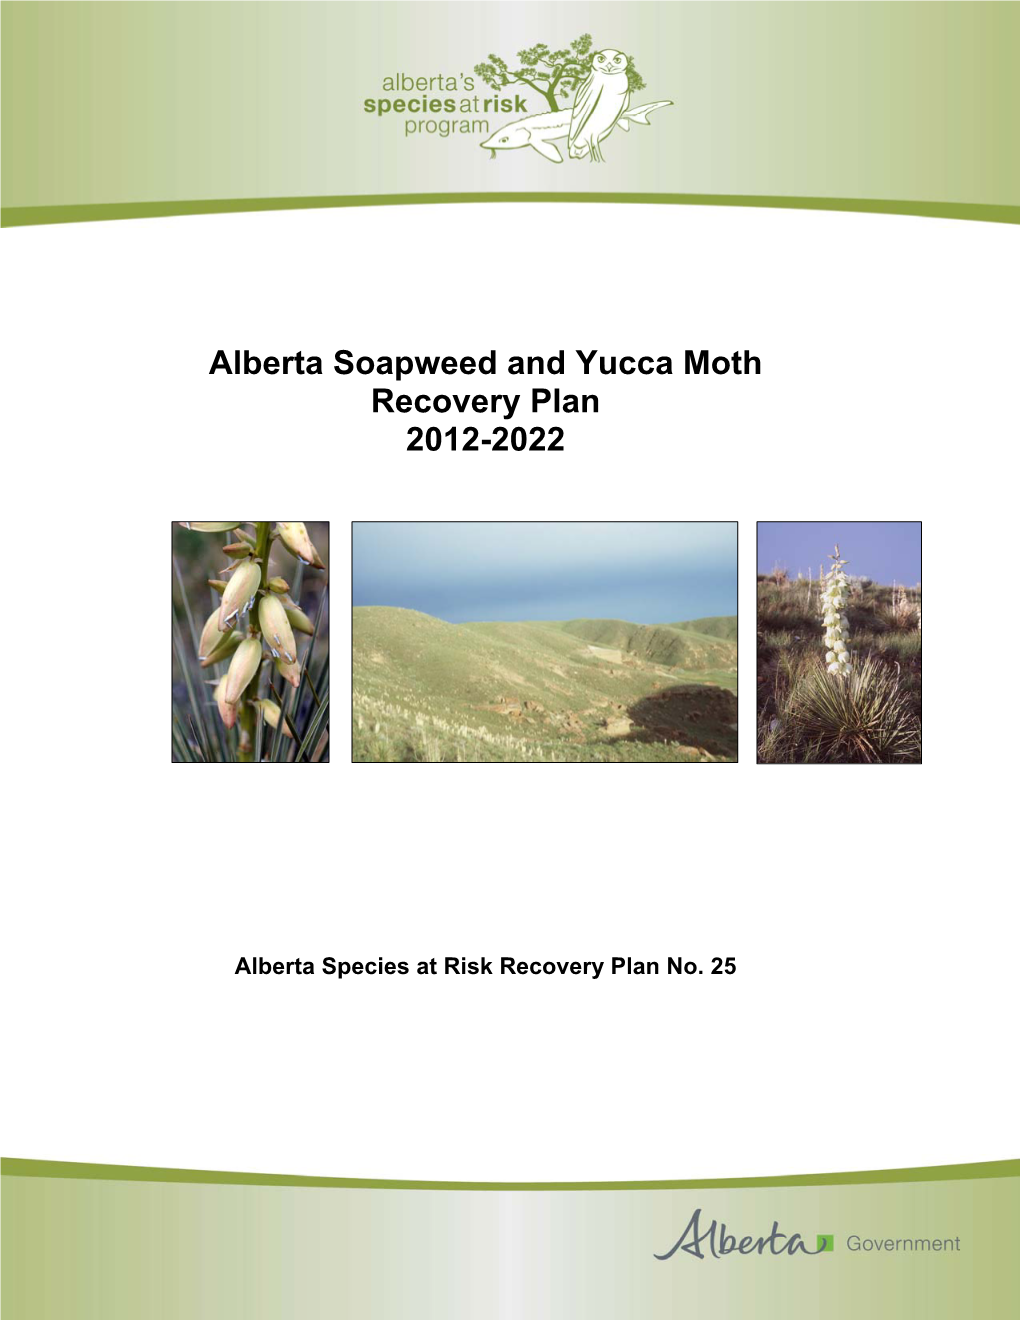 Alberta Soapweed and Yucca Moth Recovery Plan 2012-2022